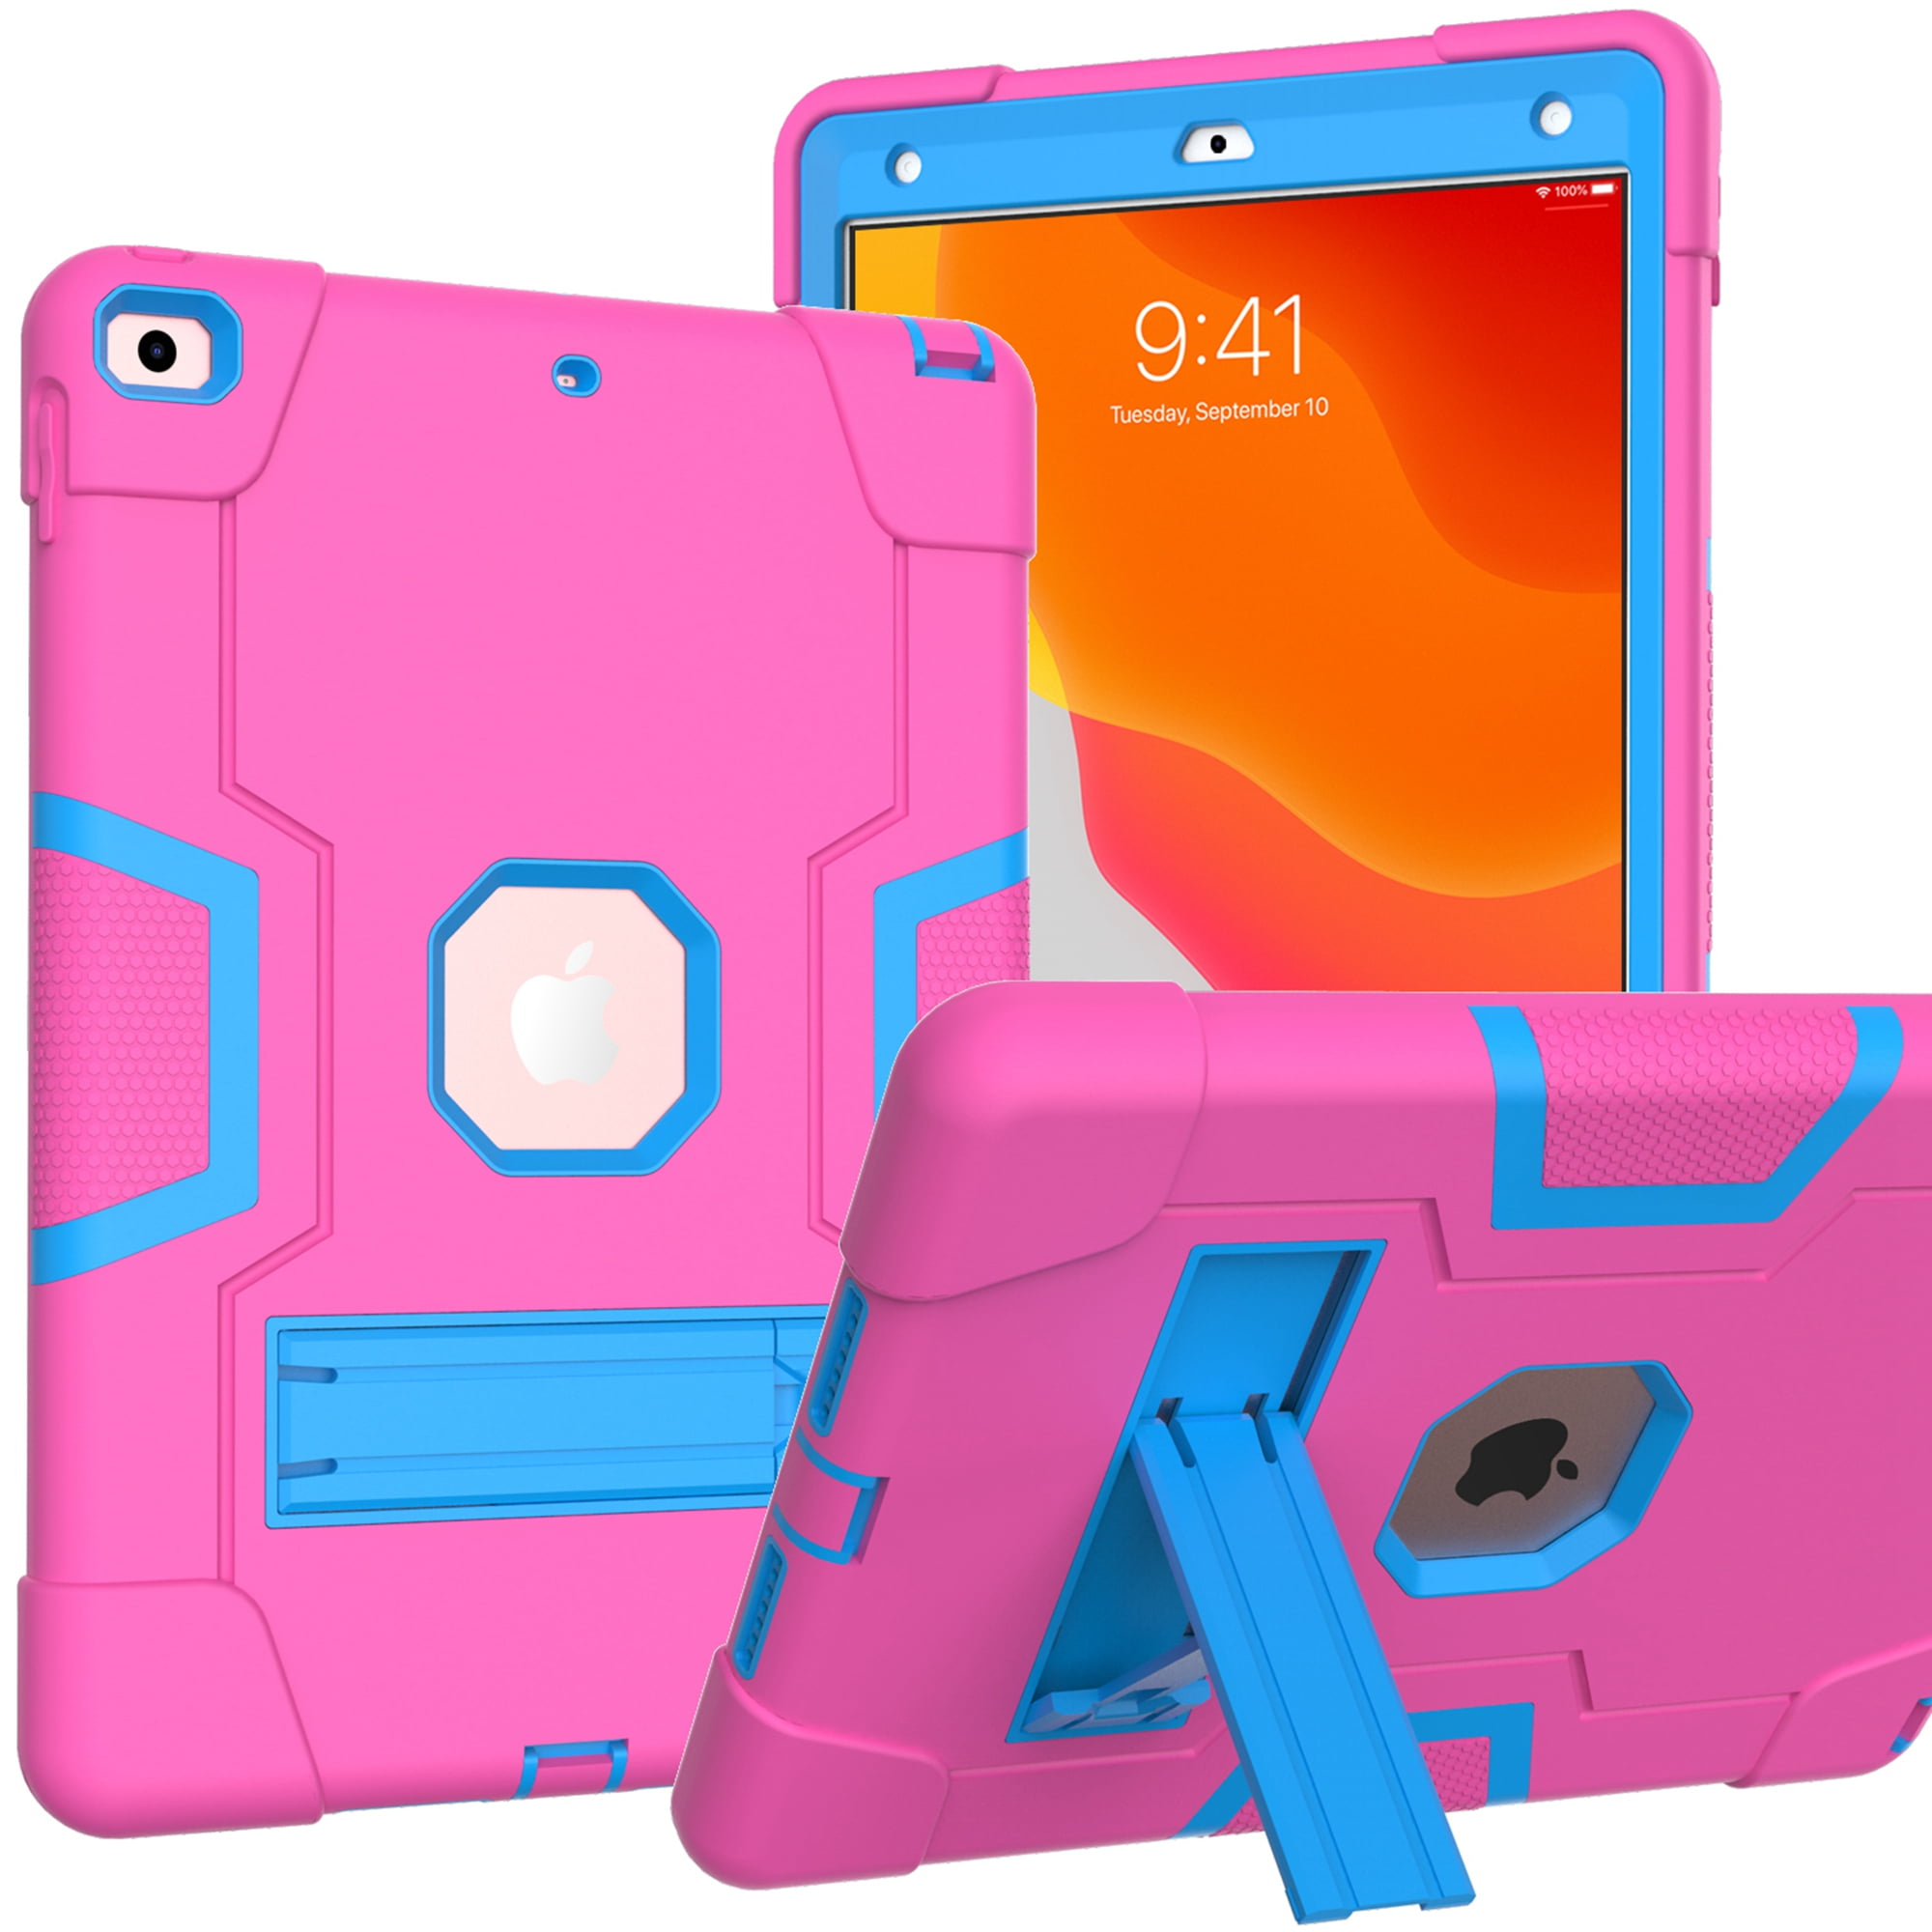 Dteck Case for iPad 9th Gen/8th Gen/7th Gen, iPad 10.2 Shockproof Case 2021/2020/2019, Heavy Duty Hybrid Rugged 3 Layer Full Body Protection Case with Built-in Kickstand,Rose/Blue - Walmart.com